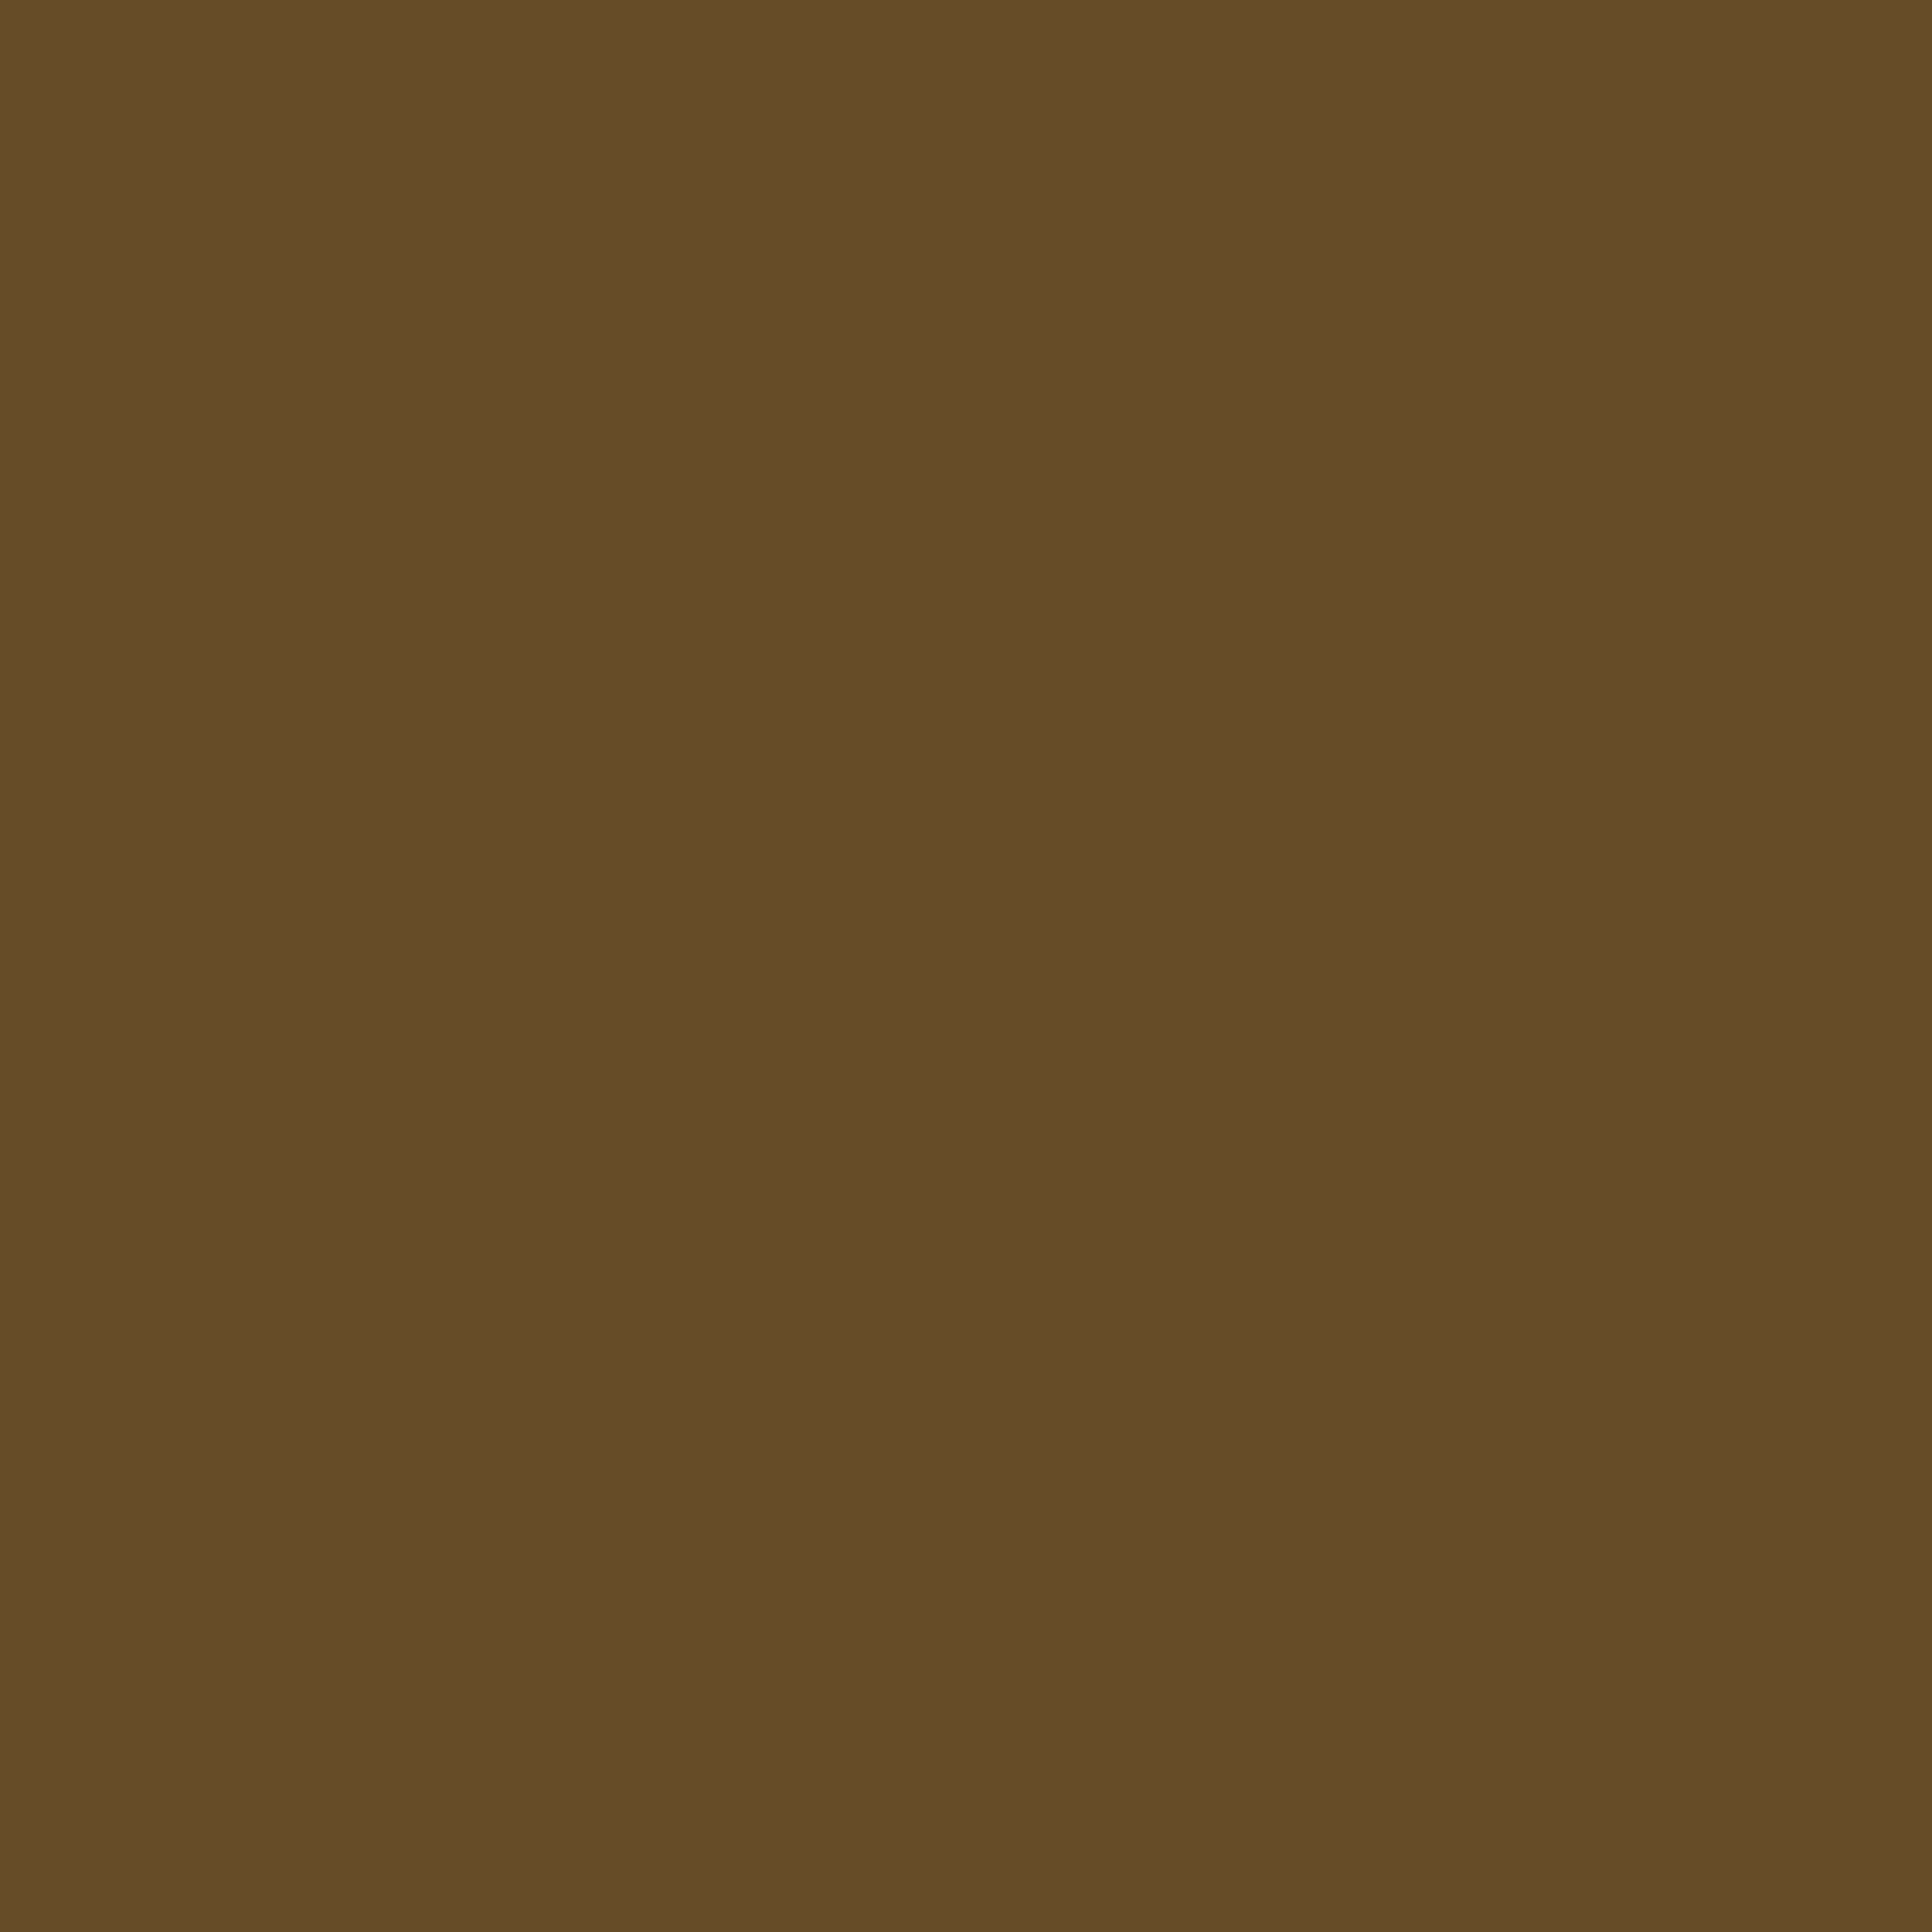 3600x3600 Donkey Brown Solid Color Background